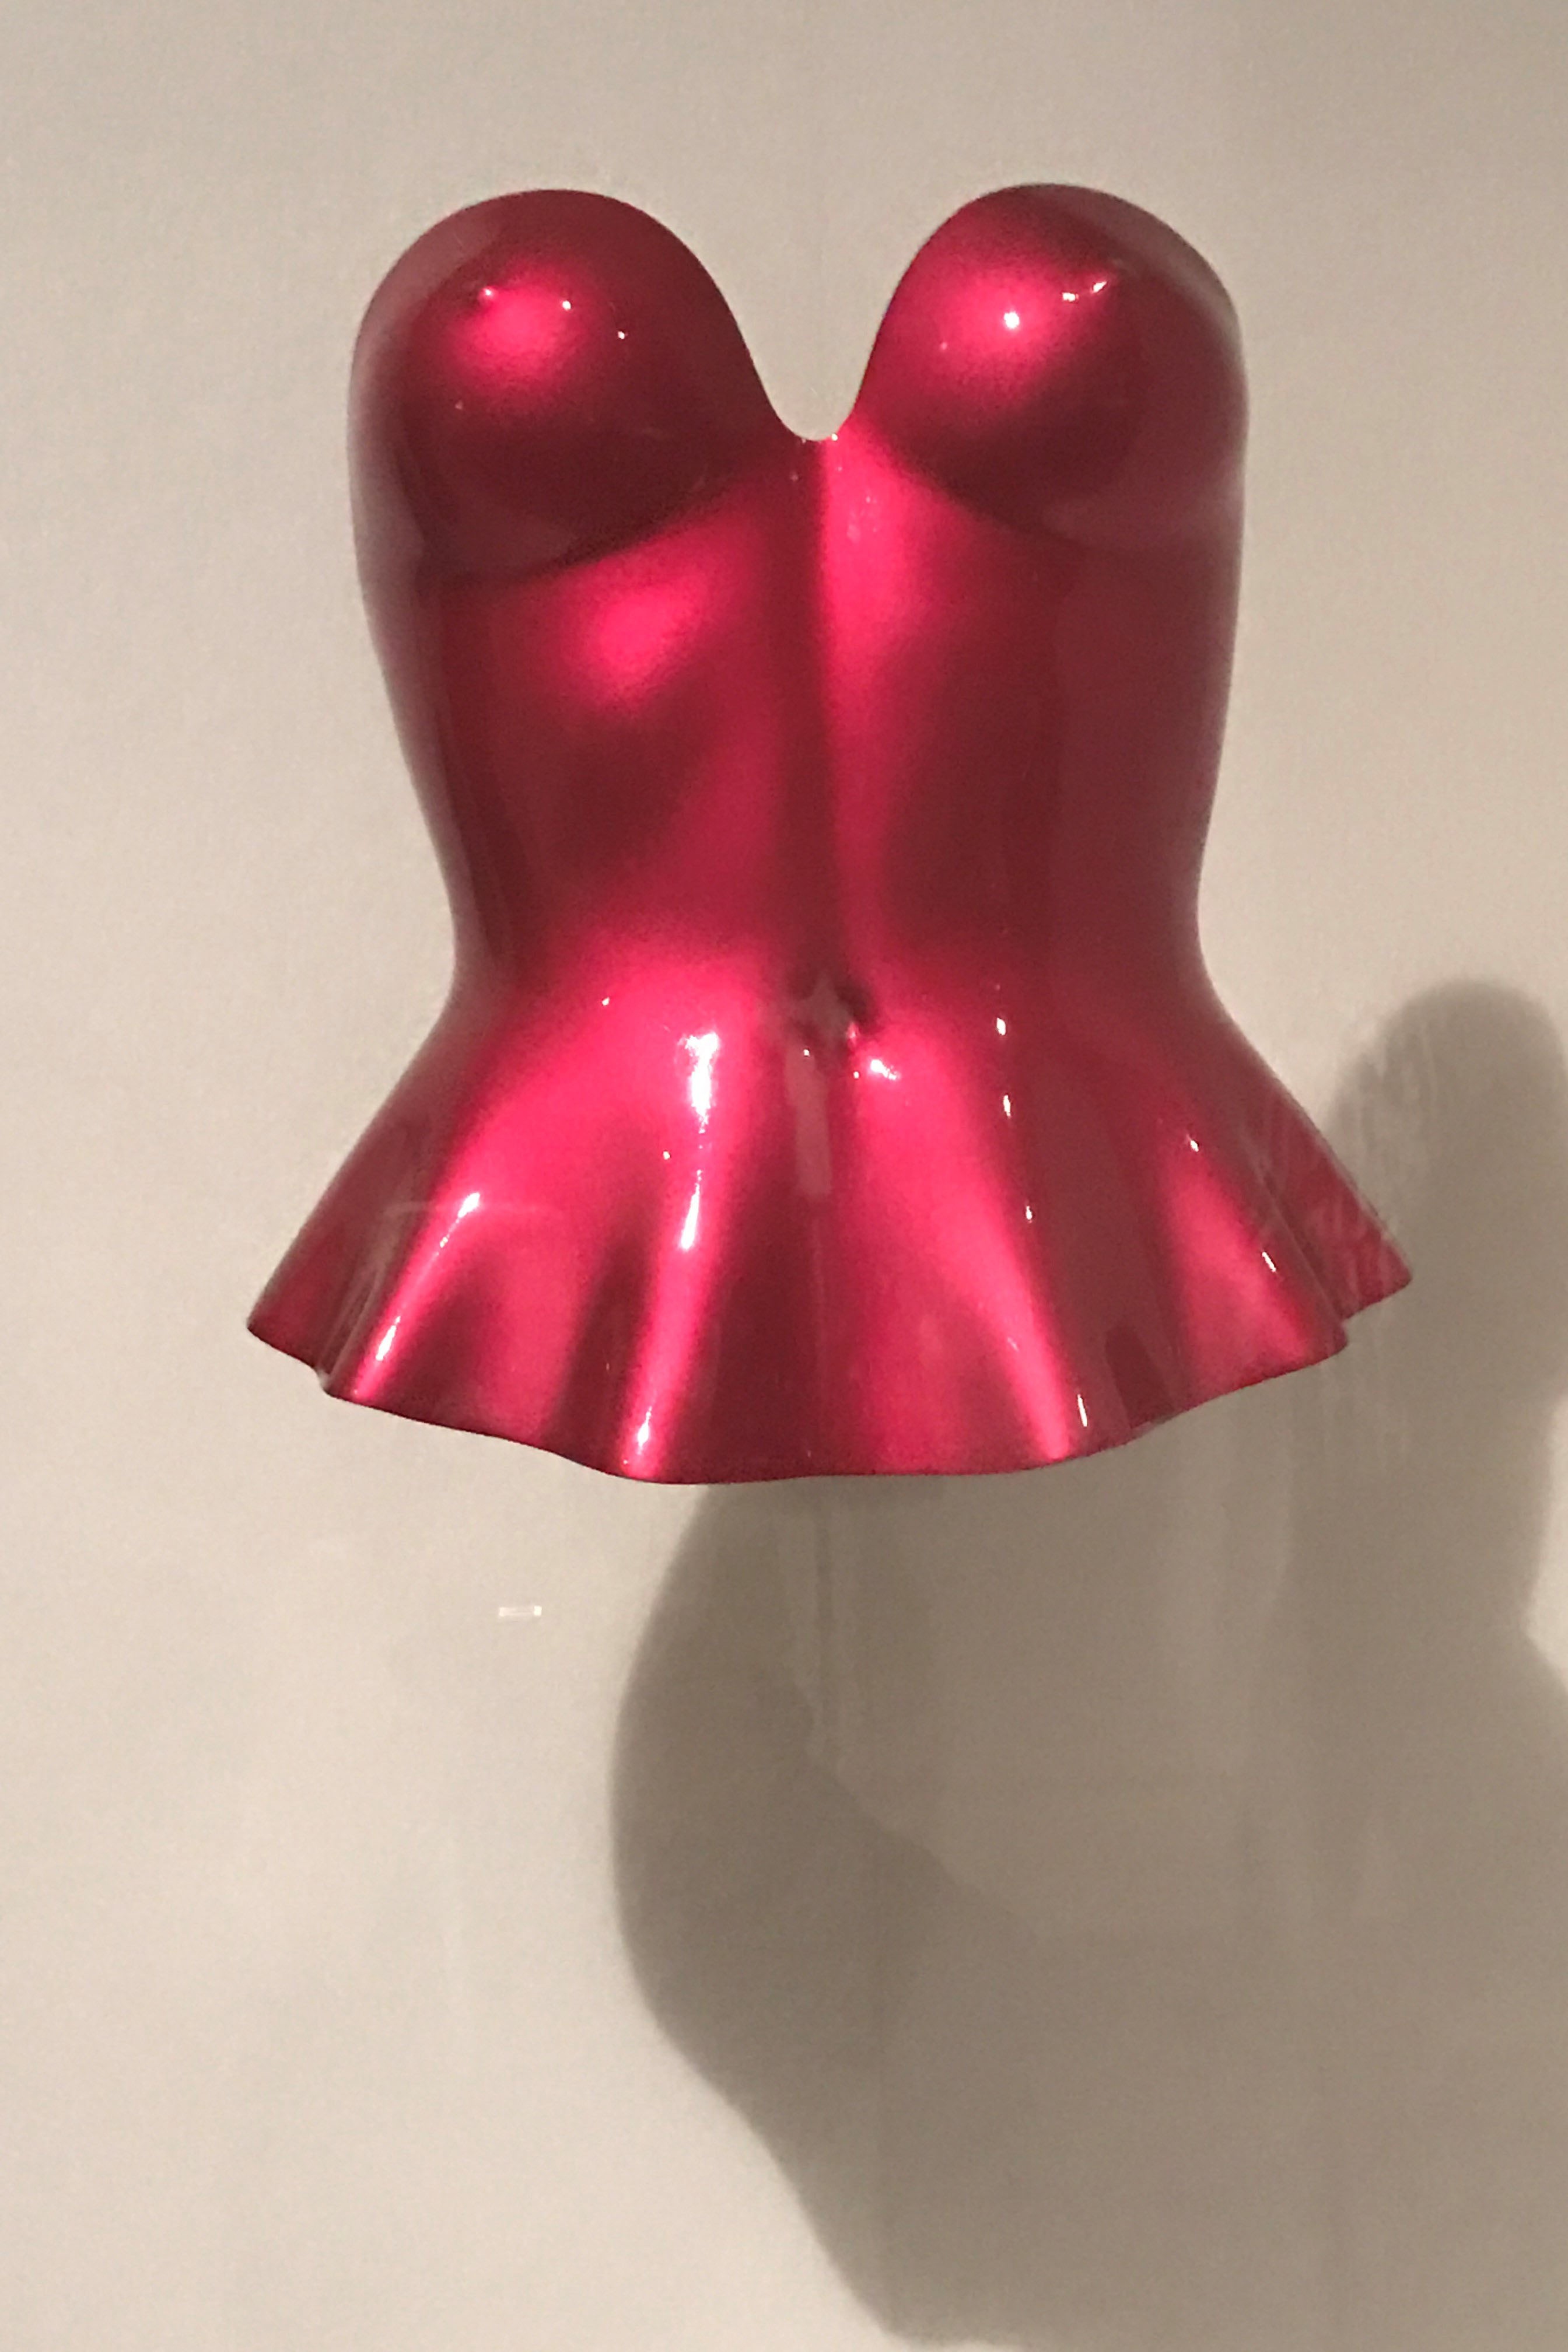 Bustier by Issey Miyake (Japanese, born 1938), Autumn/Winter 1980-81, made from red moulded polyester resin and cellulose nitrate. Purchase, Friends of The Costume Institute Gifts, 2015 (Foto: @SUZYMENKESVOGUE)